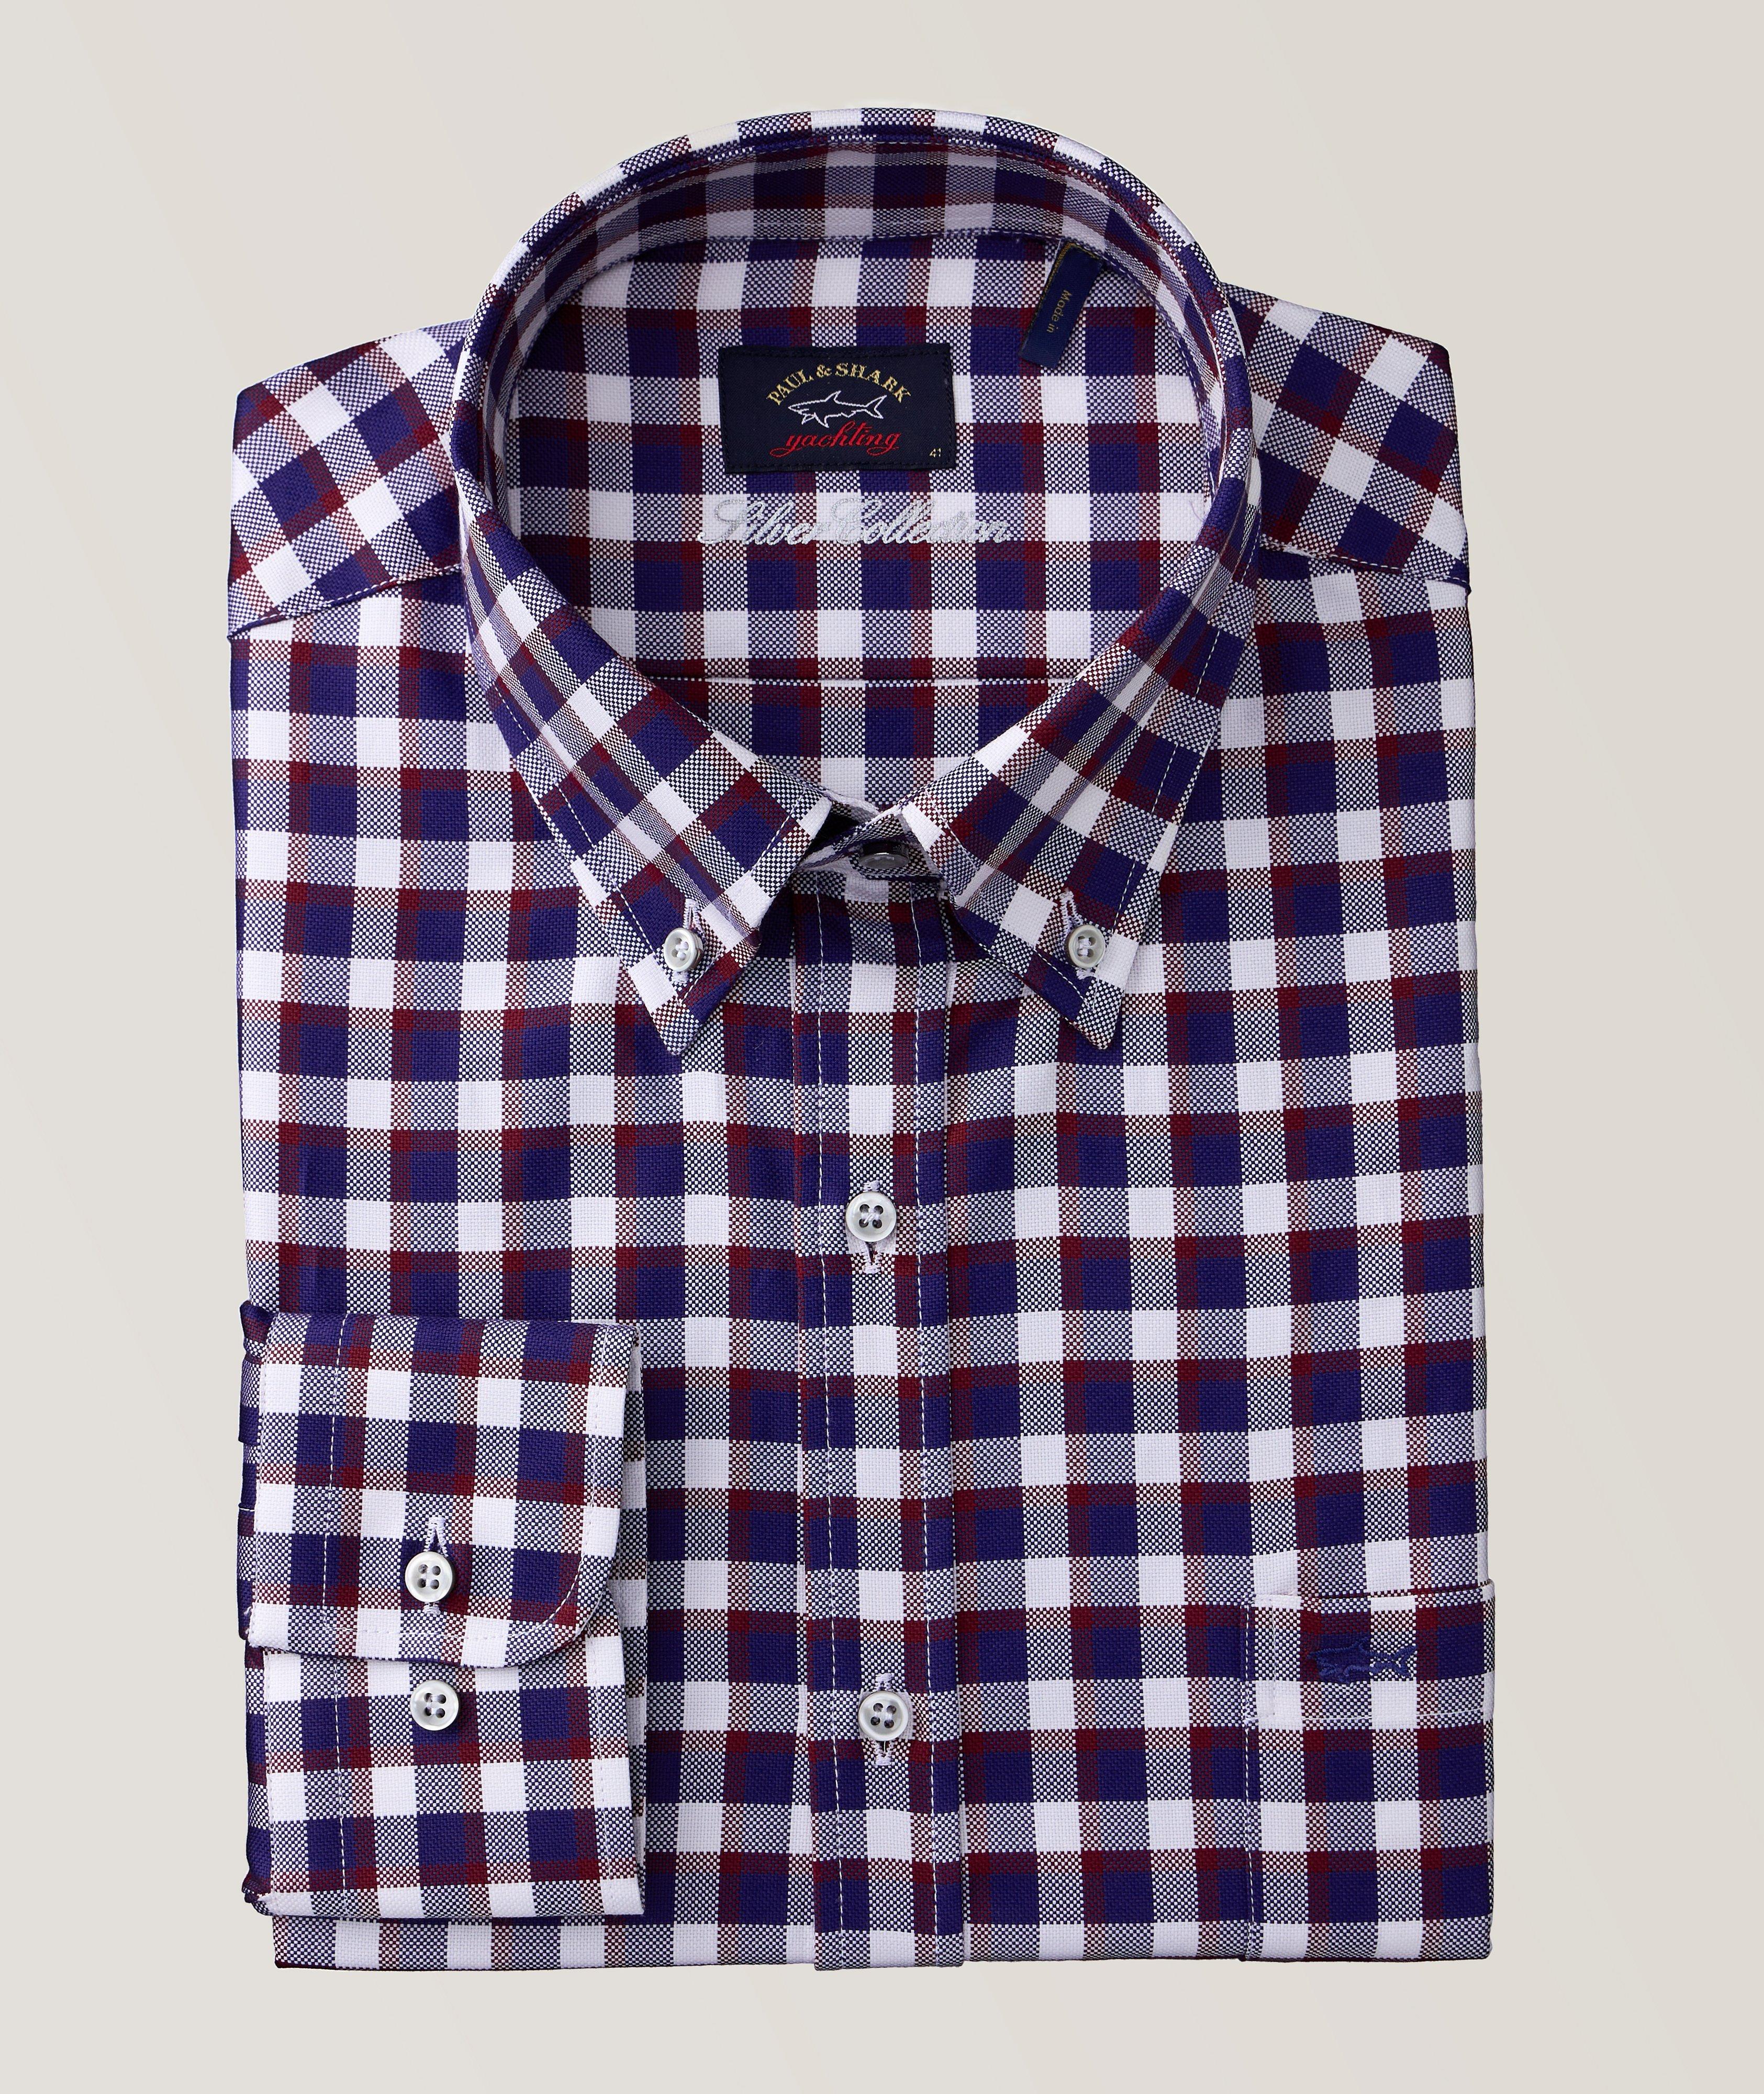 Silver Collection Checkered Cotton Dress Shirt image 0